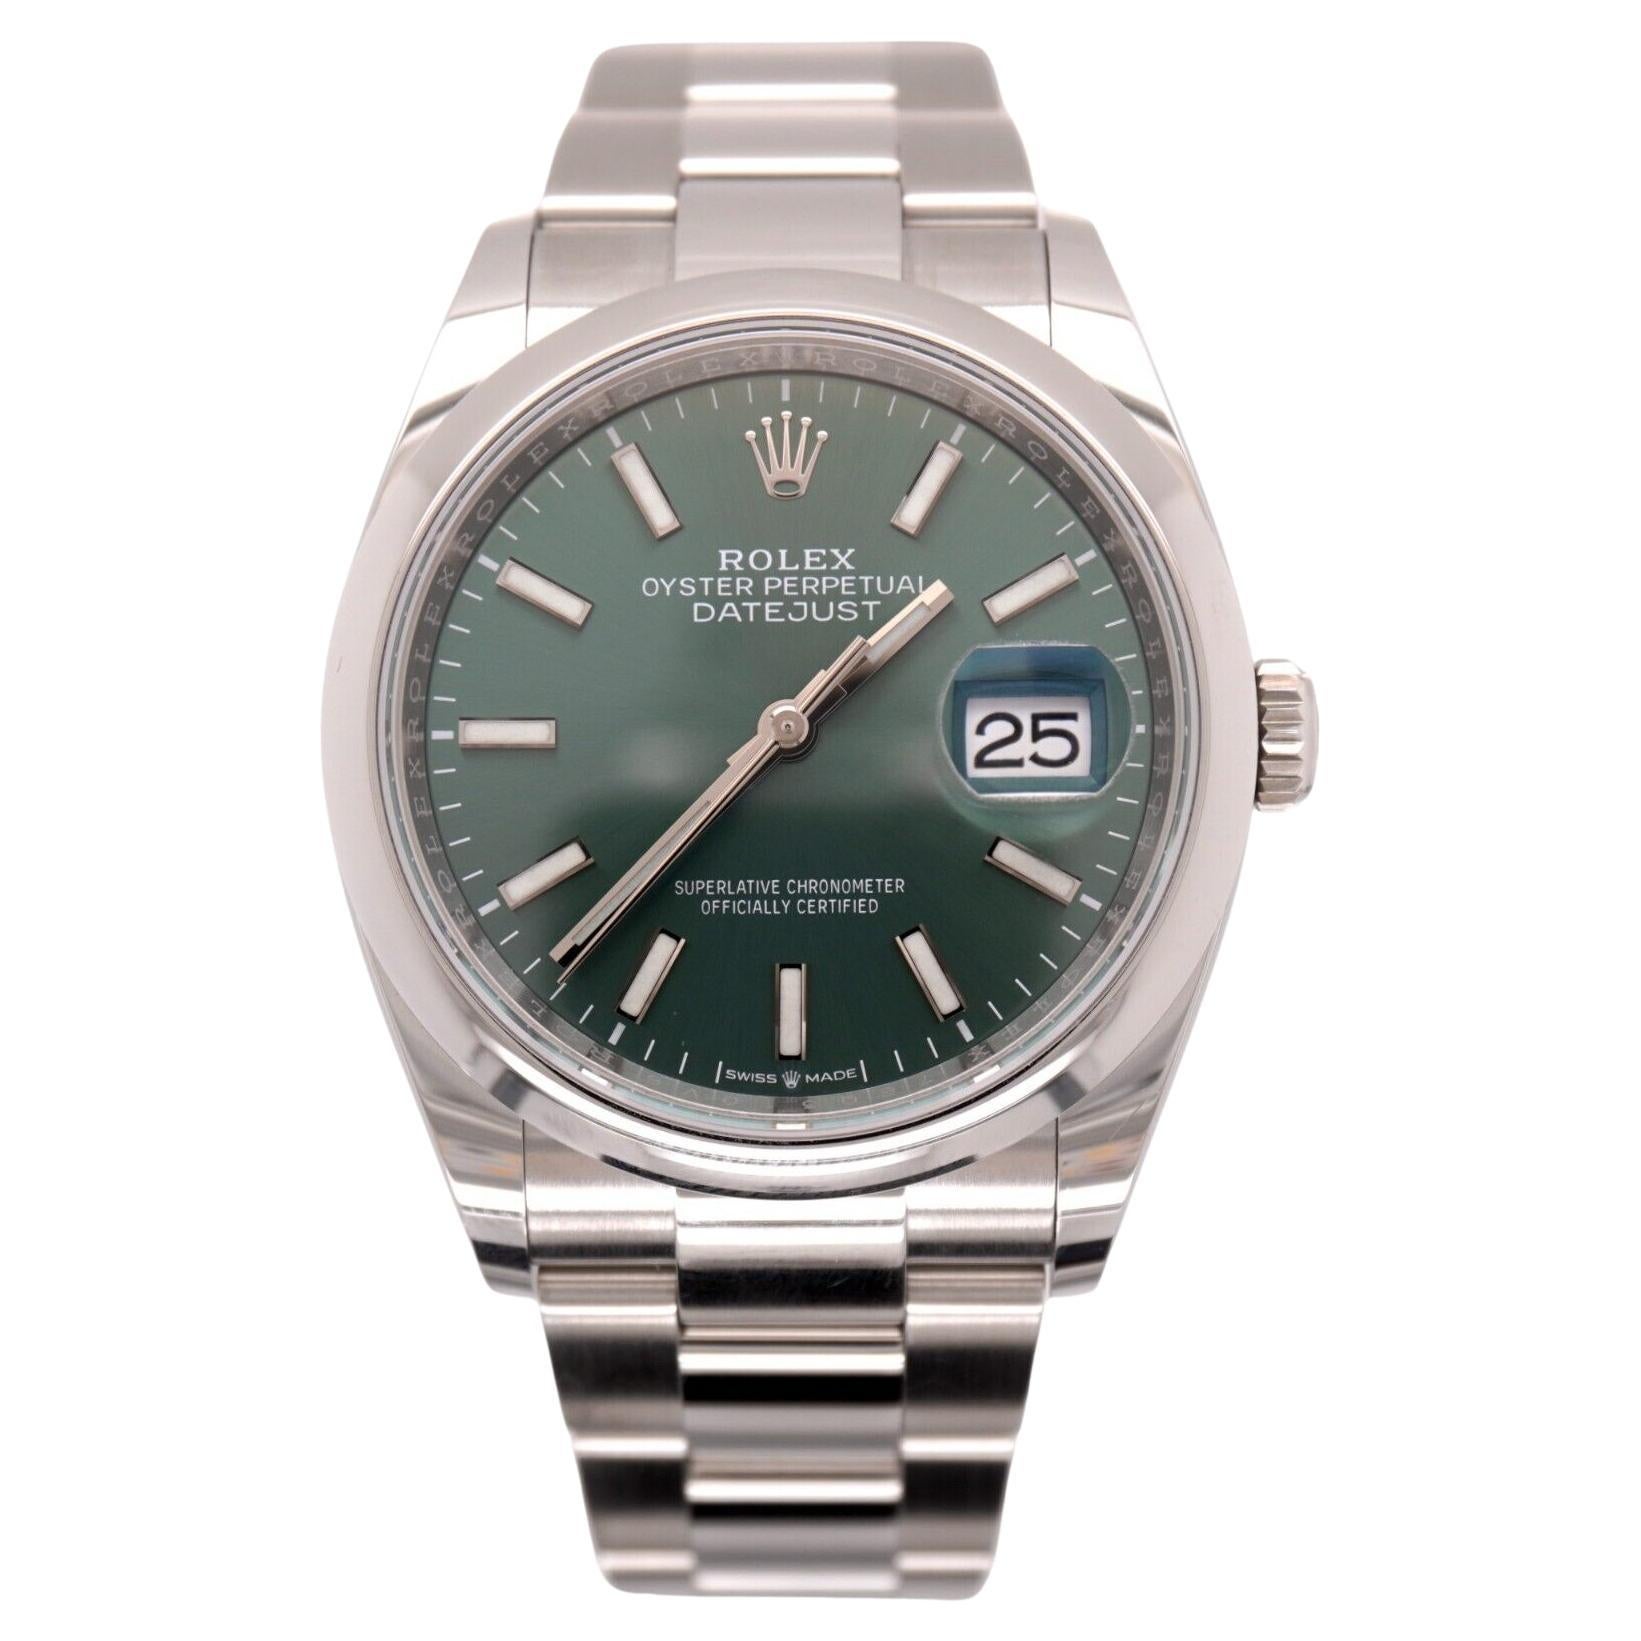 Rolex Datejust 36mm Stainless Steel Green Dial Smooth Oyster Watch Ref: 126200